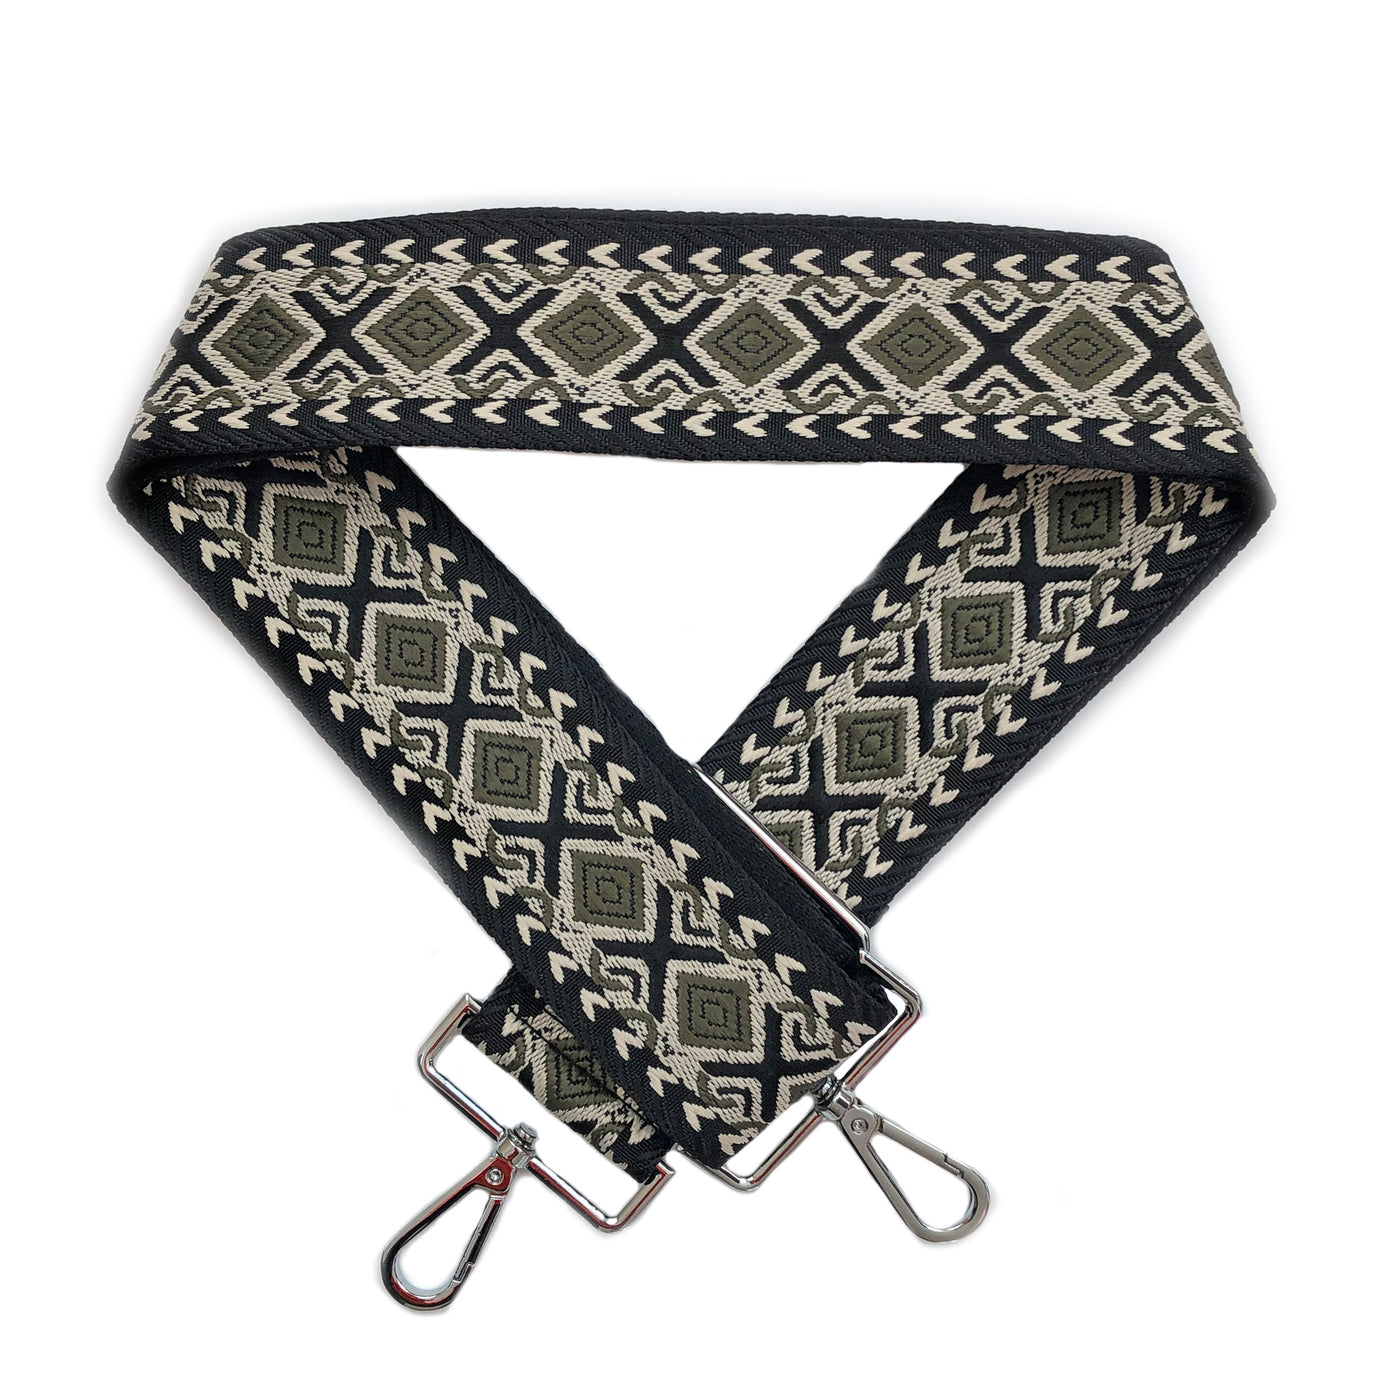 A sage green, black and beige geometric patterned woven bag strap with silver metal buckles, shown laying on a plain white background.